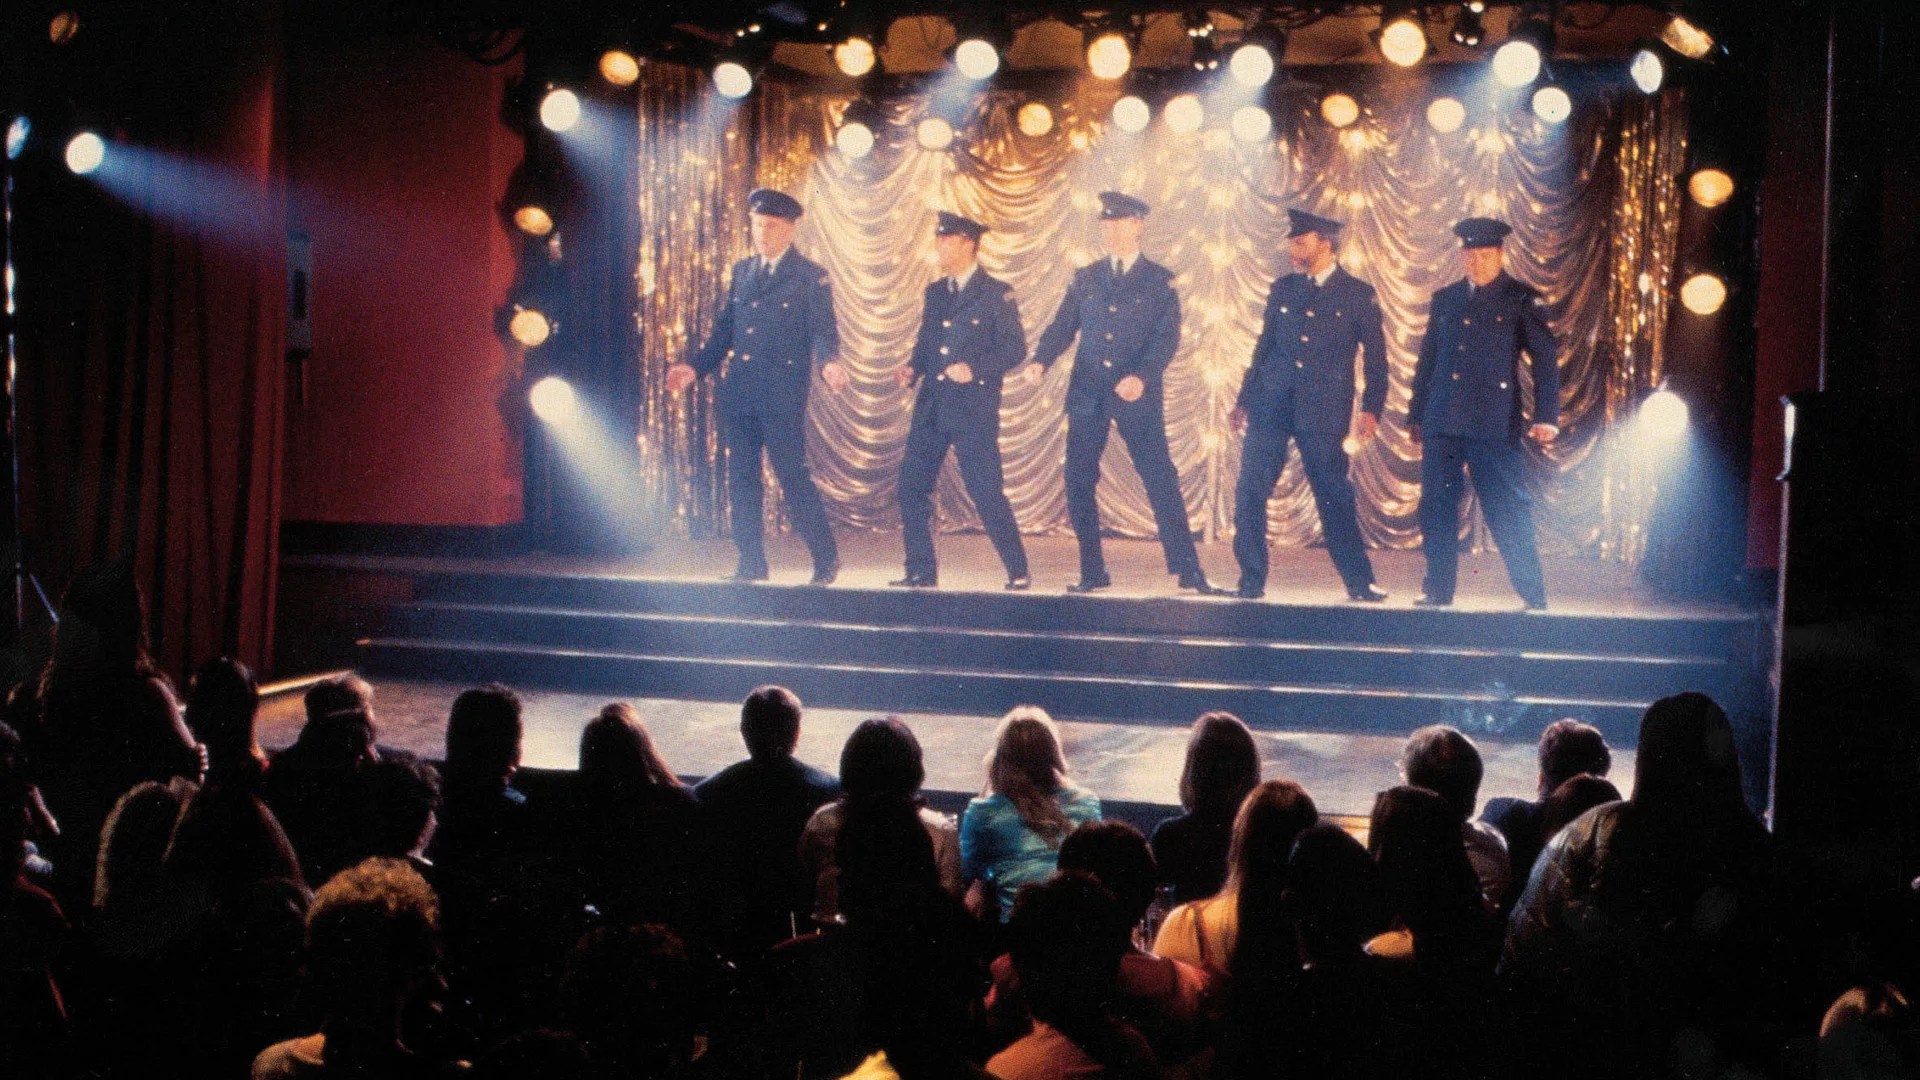 The Full Monty cast on stage in the original film